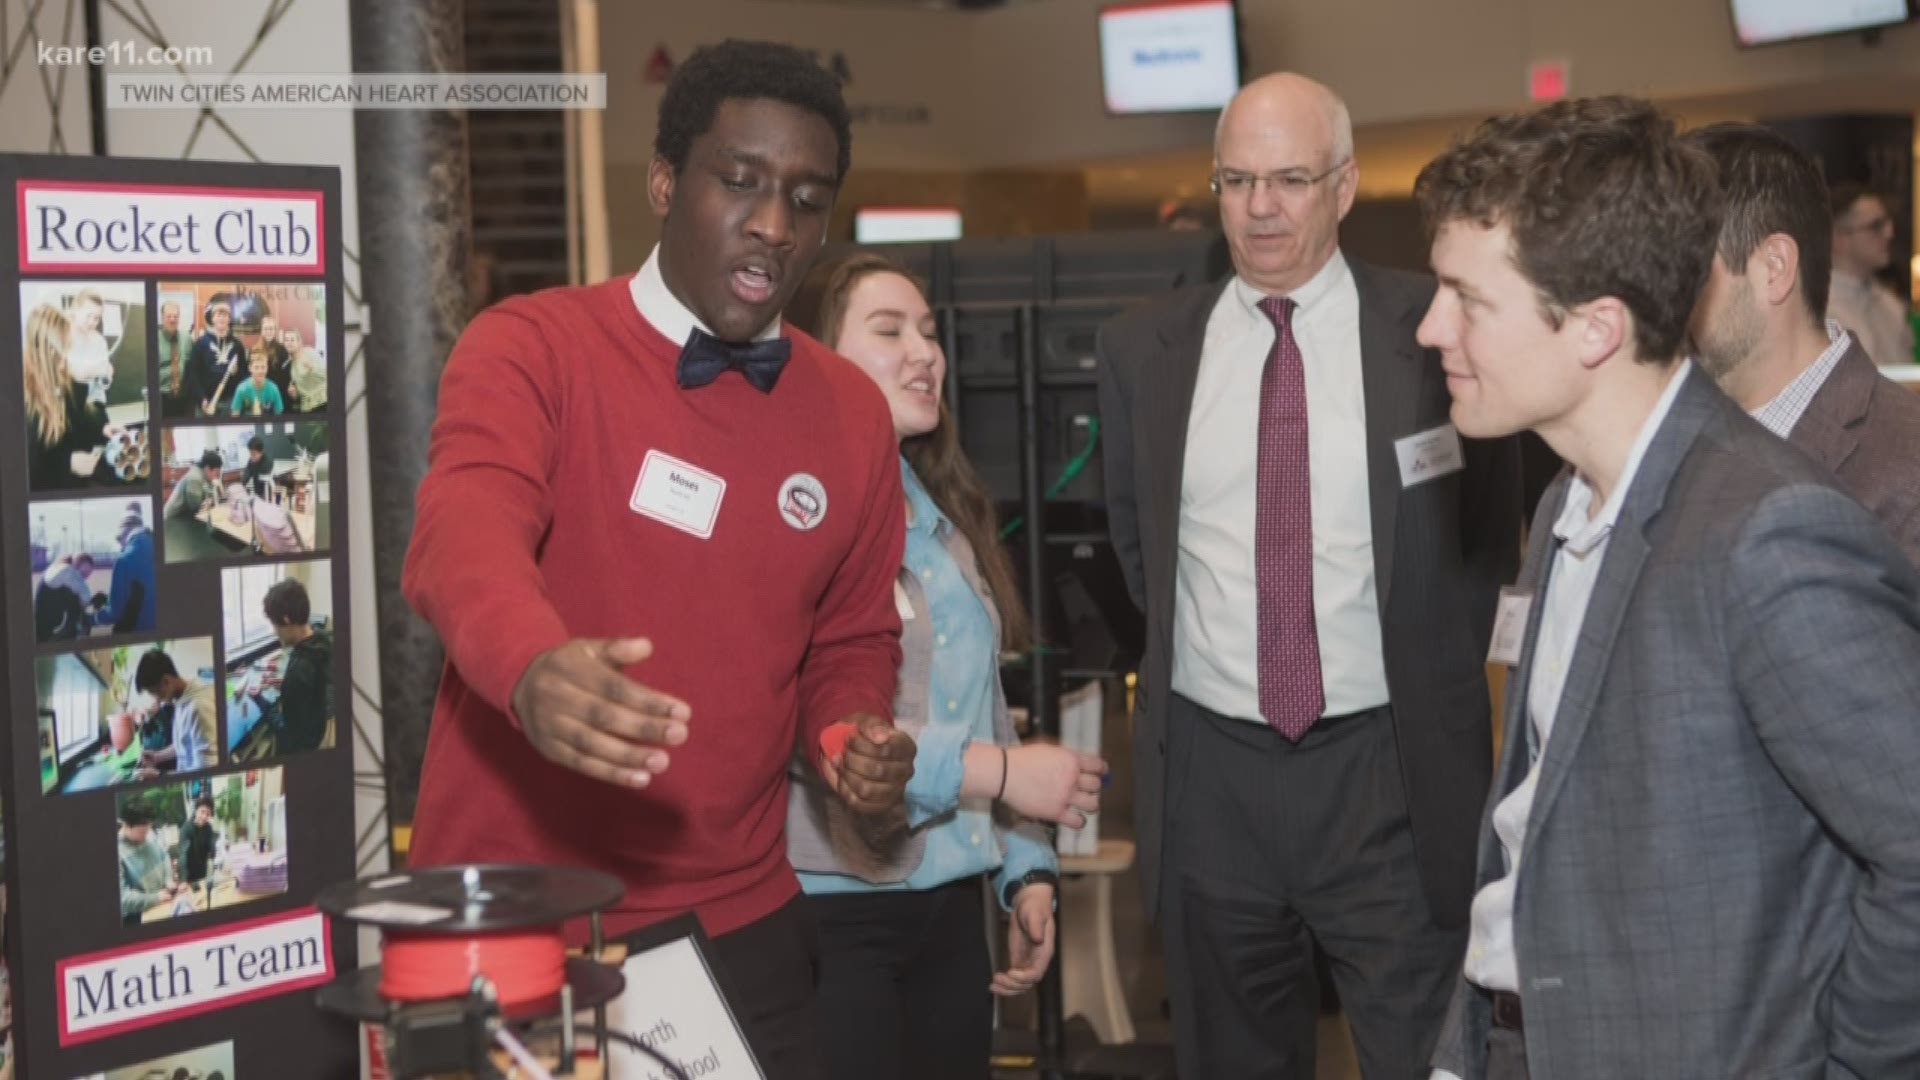 A hundred and thirty local high school students will assemble to explore STEM outside the classroom April 23, and get a unique opportunity to “speed mentor” with local health care and tech professionals and leaders. https://kare11.tv/2VOsdvt